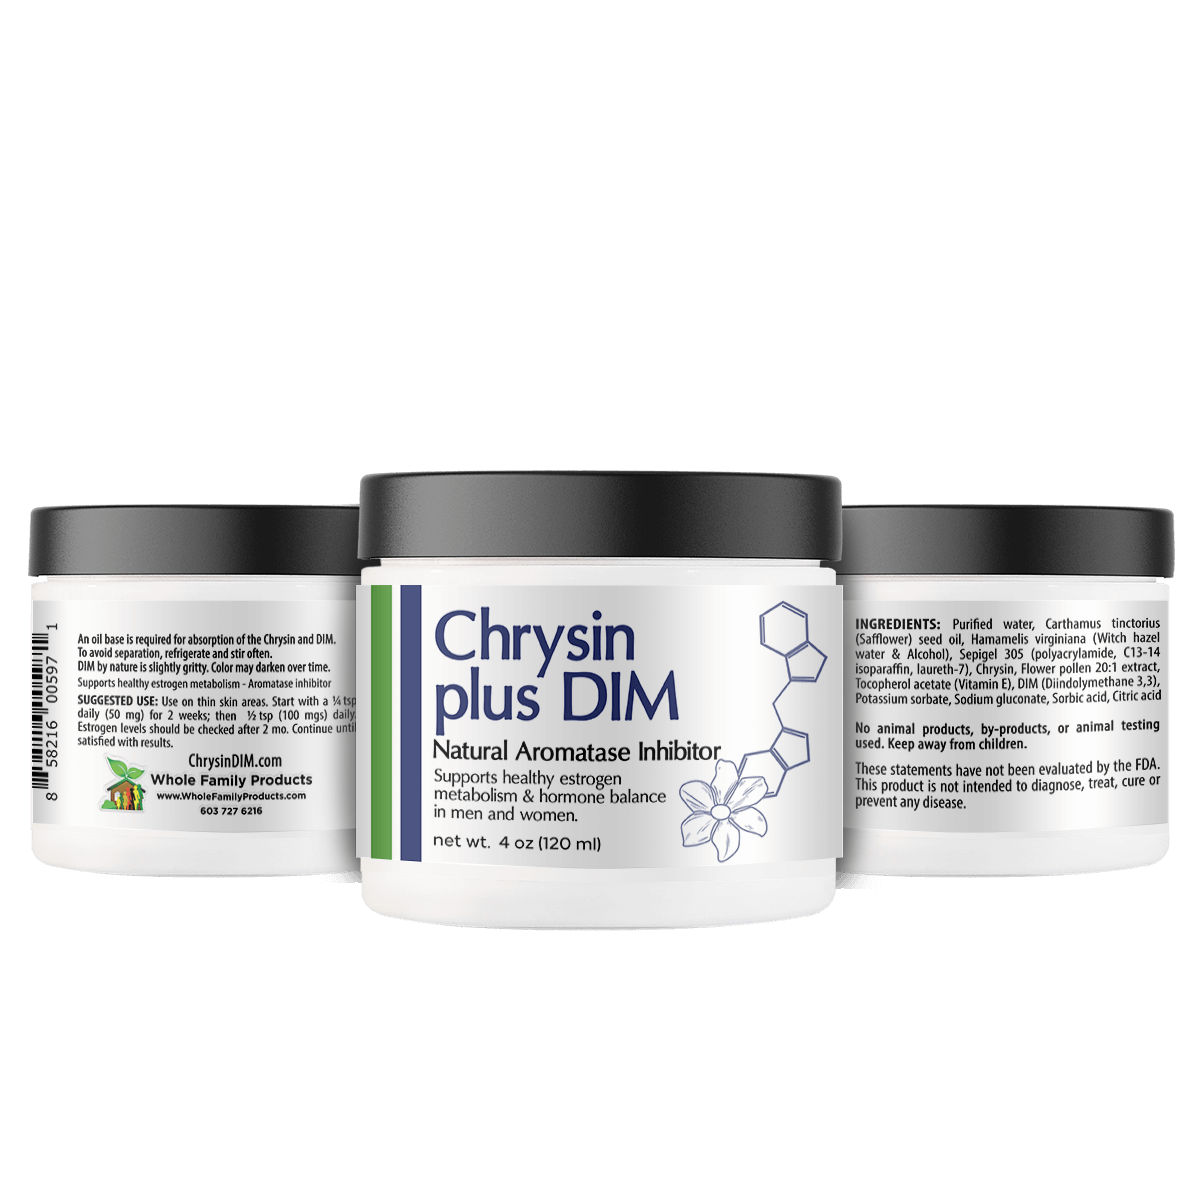 Chrysin plus DIM 4oz jar - Supports Metabolism and Hormone Balance in Men and Women